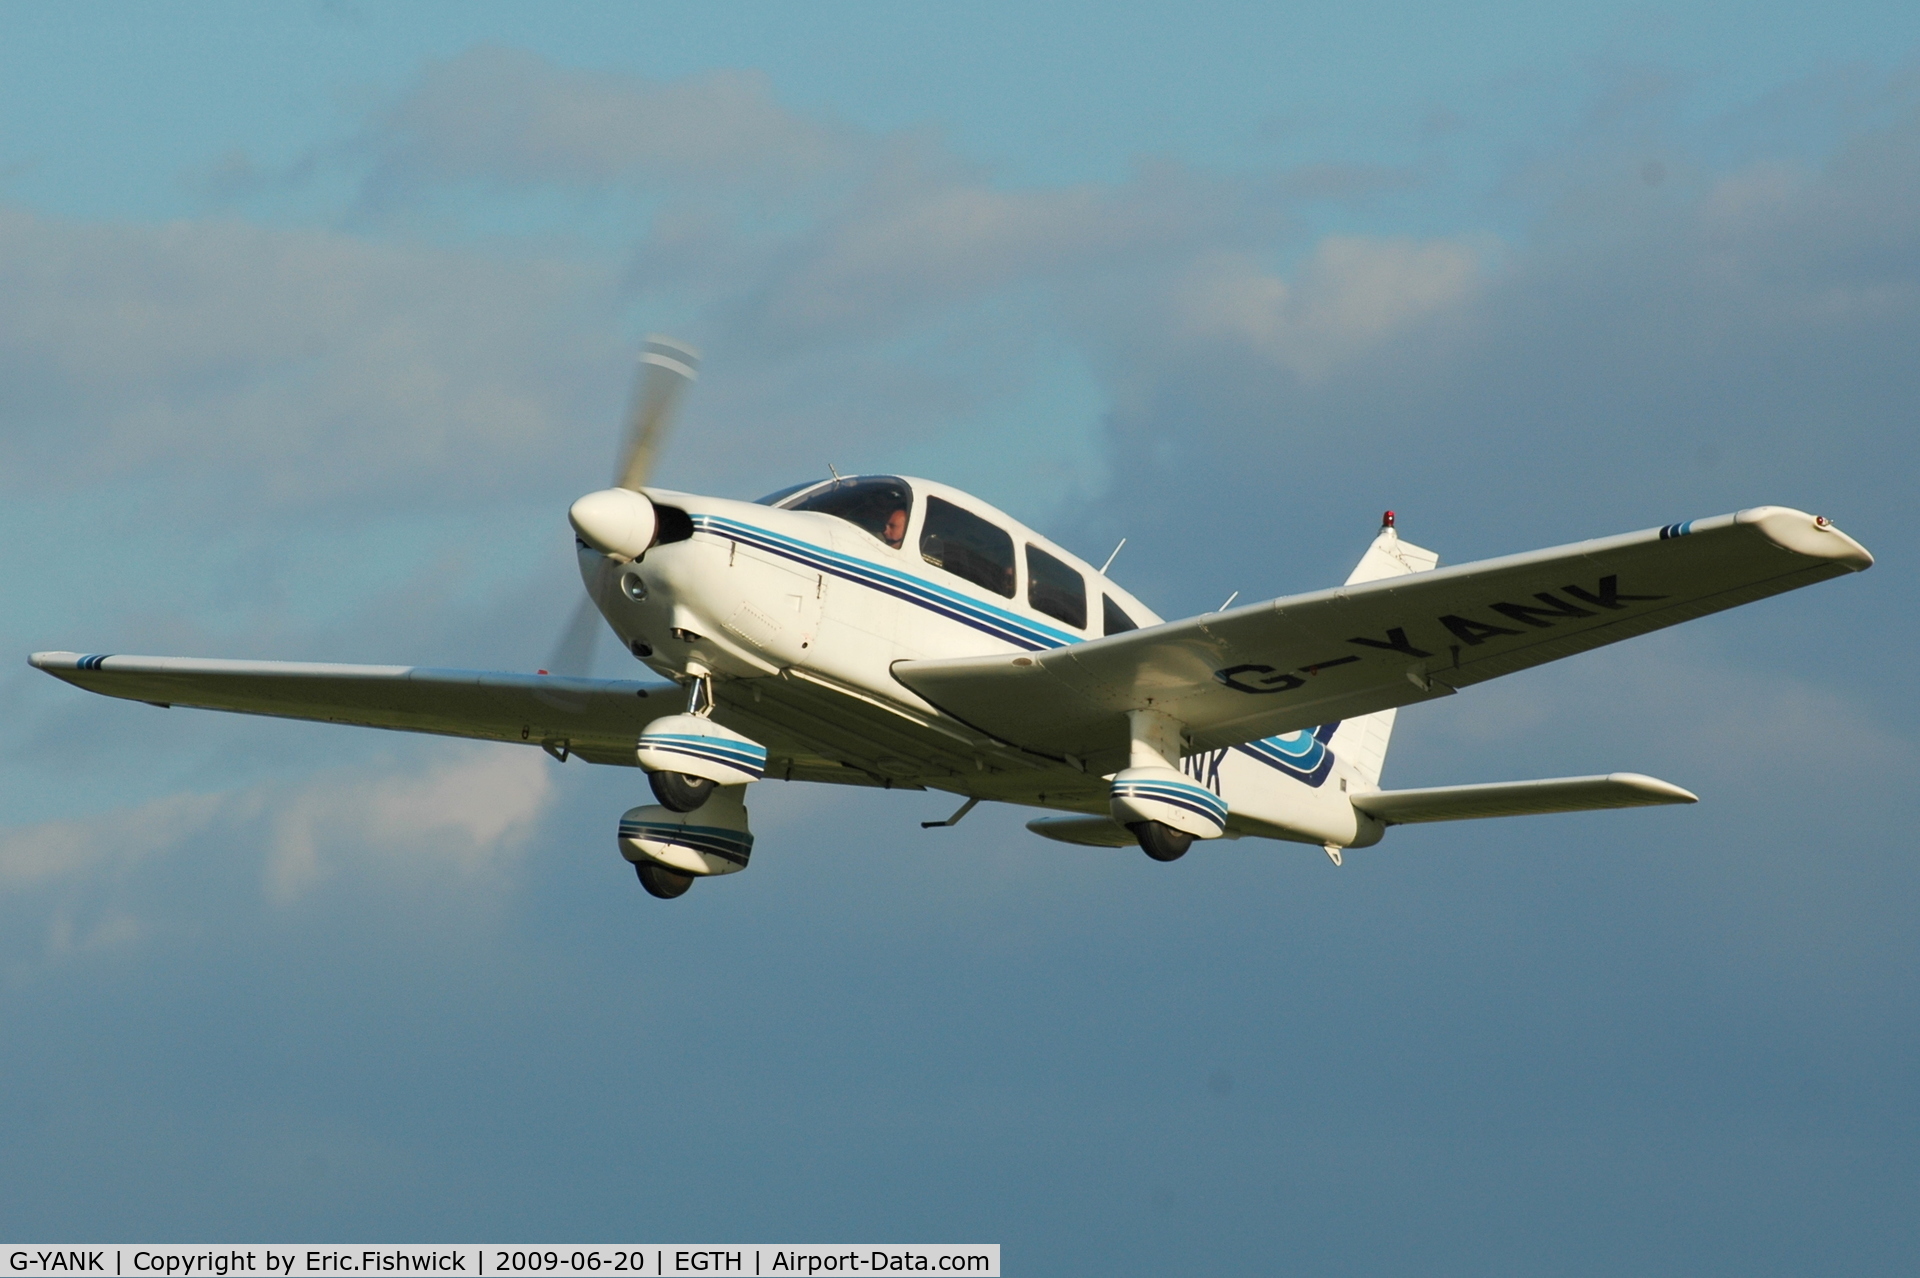 G-YANK, 1979 Piper PA-28-181 Cherokee Archer II C/N 28-8090163, G-YANK departing Shuttleworth Collection Evening Air Display